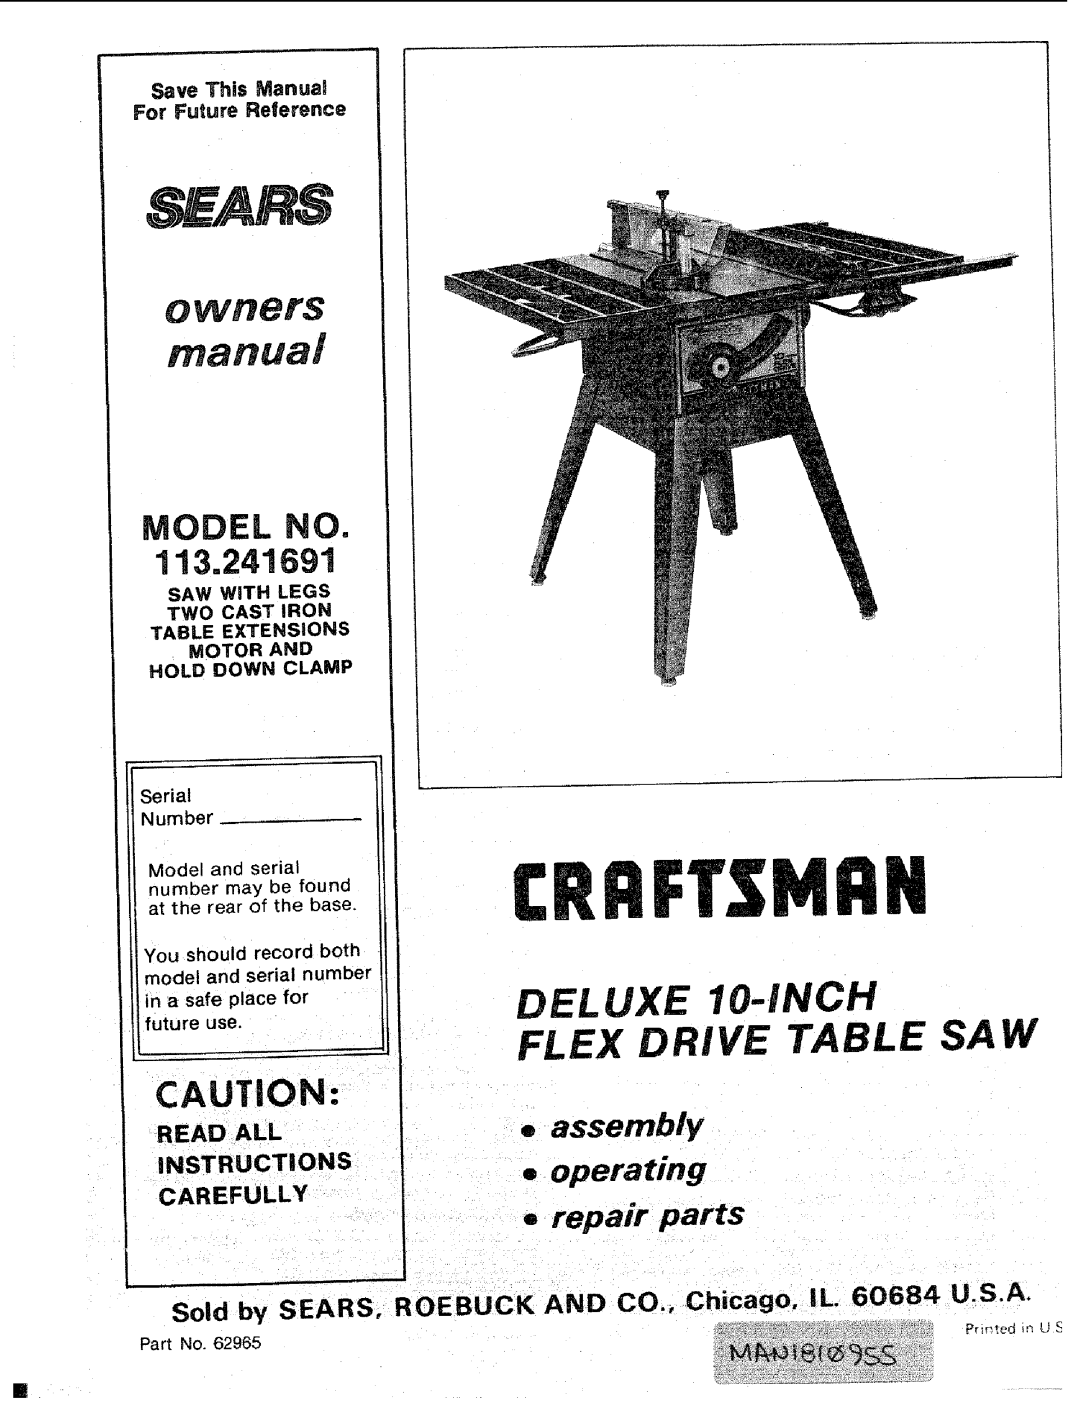 Sears 113.241591 owner manual Model No, assembly operating = repair parts, Read All Instructions Carefully, owners manual 